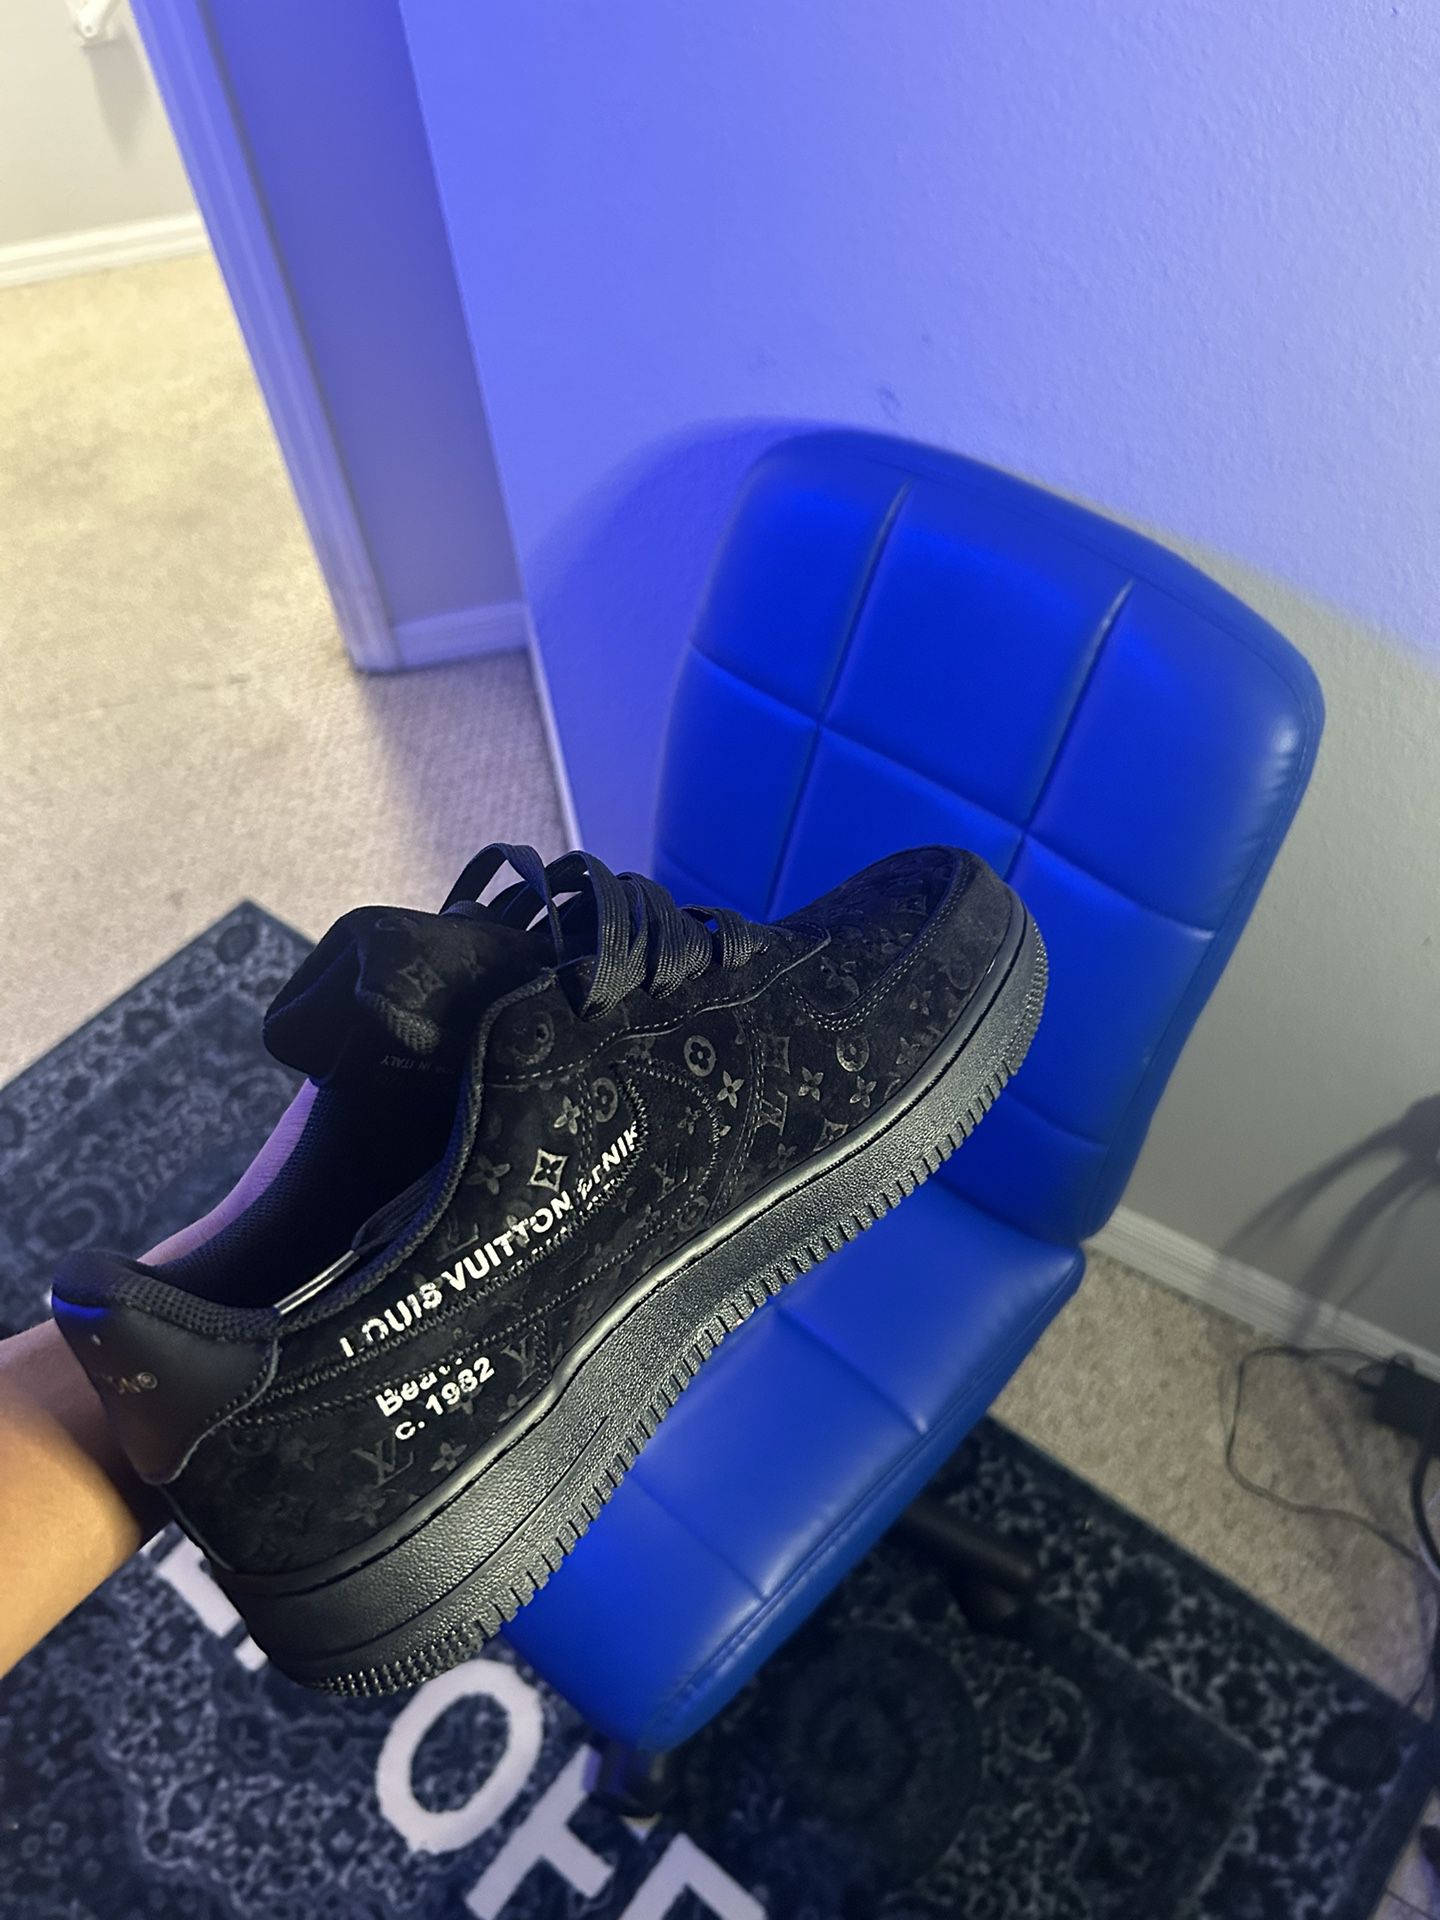 Nike Louis Vuitton Air Force 1 Black for Sale in Providence, RI